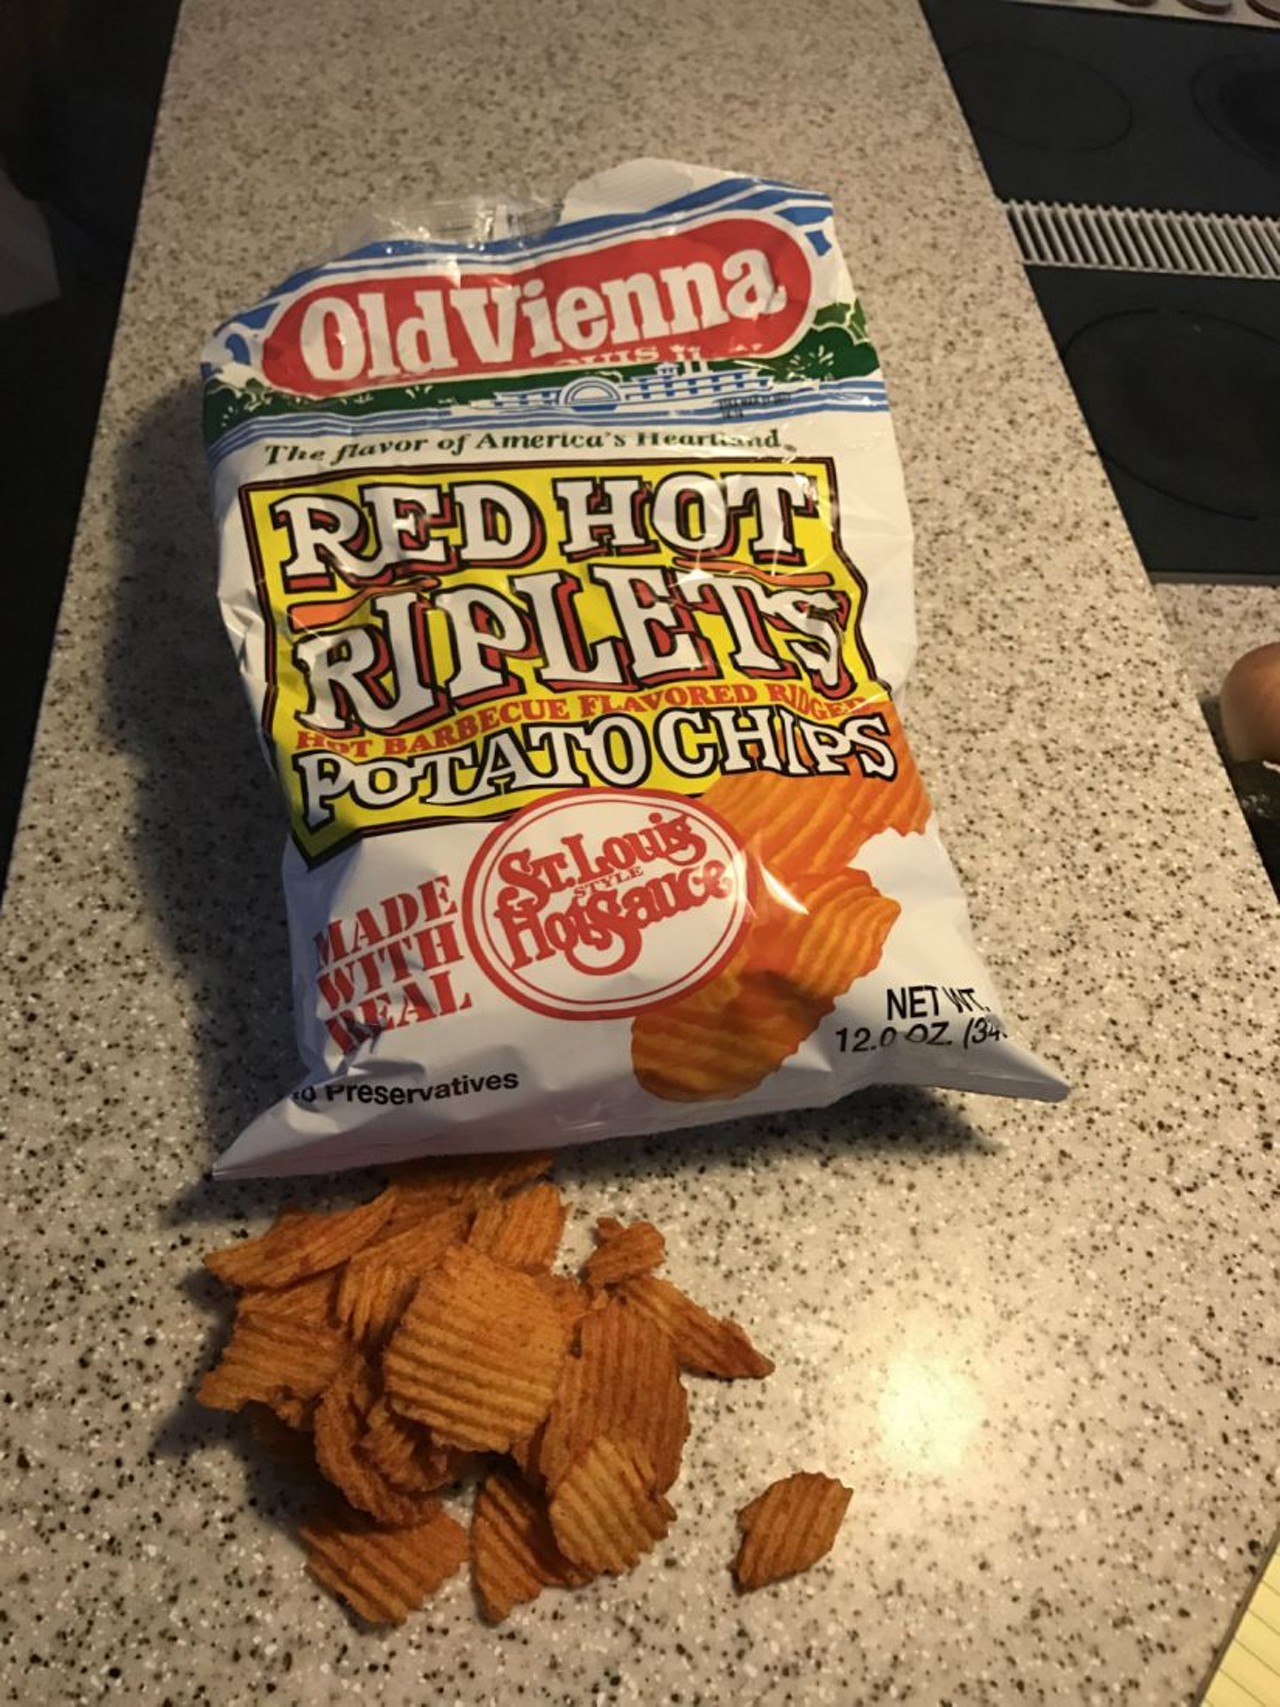 Why they aren't the best: Let's not kid ourselves: These chips are fucking hot. And that's putting it lightly. It's not like tortilla chips or Cheez-its&reg; where you can accidentally finish a whole family bag in one sitting; you'd need about five glasses of milk and two sticks of celery to take down a large bag of Red Hot Riplets&reg;. Some say that's what makes them great, but the competition here is fierce: Other St. Louis food stuffs can surely paint the Riplets' searing strength as a liability. Photo by Alec Herr.